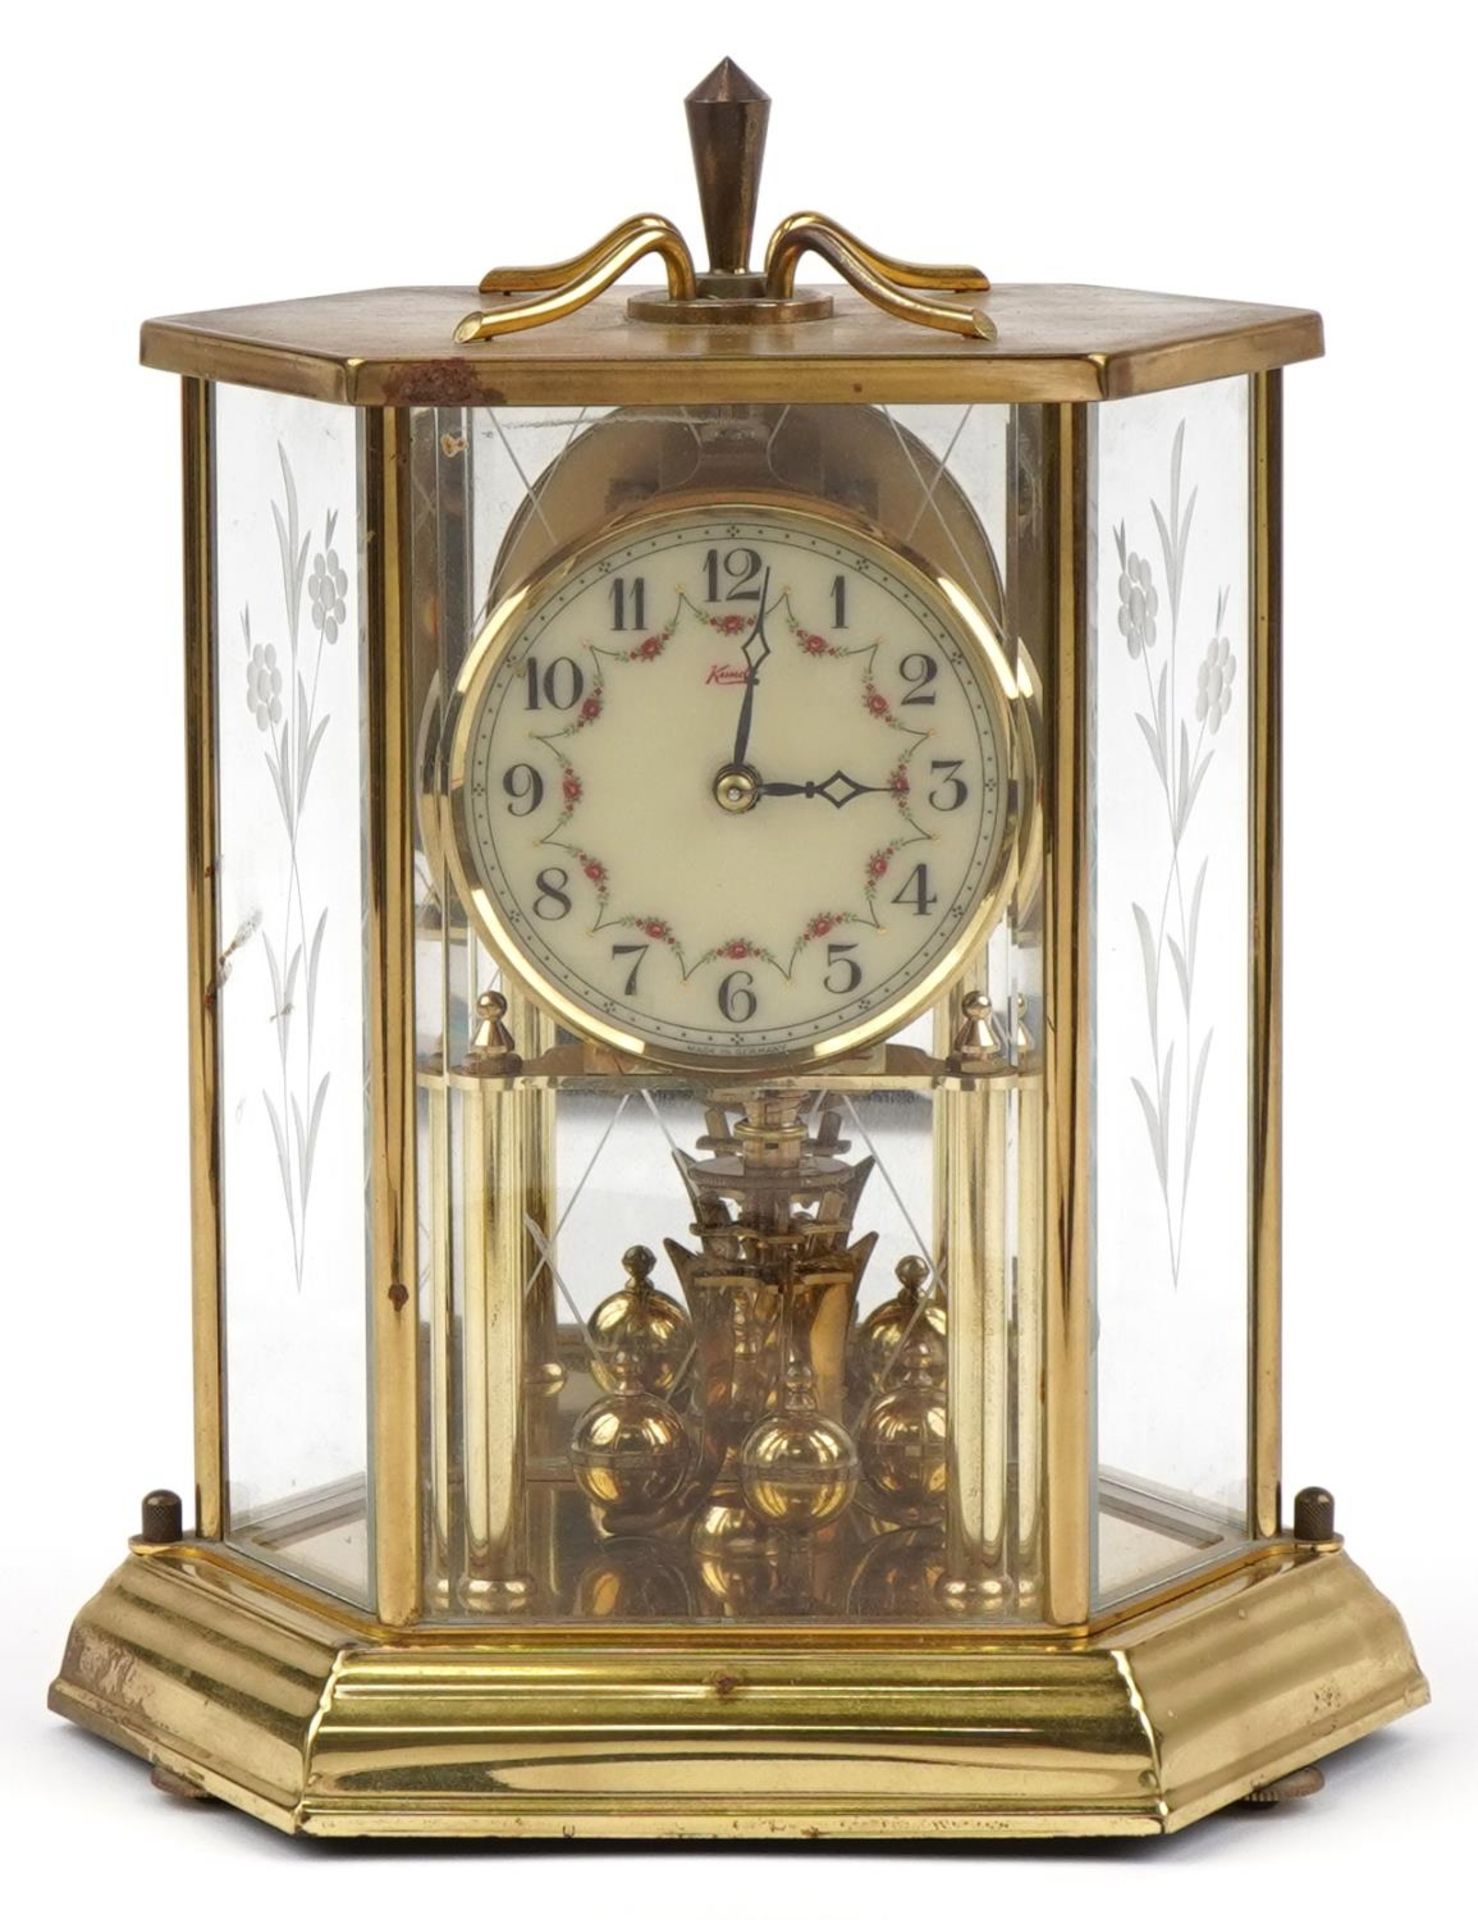 Kundo brass cased anniversary clock with bevelled glass panels, 25.5cm high : For further - Image 2 of 4